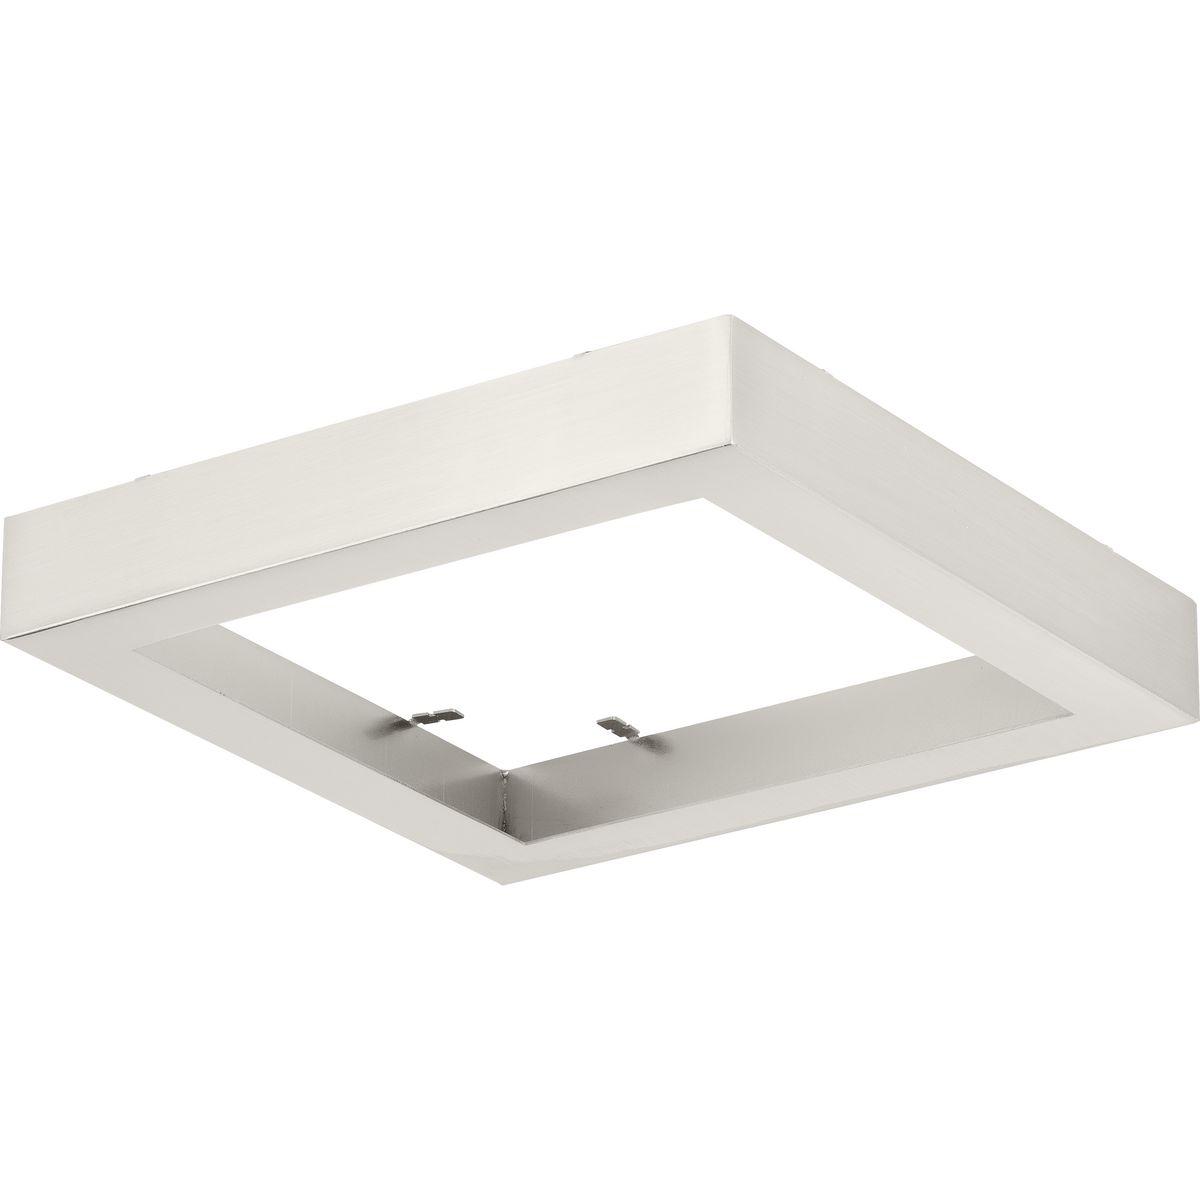 Hubbell P860053-009 You'll never have to sacrifice function for style with this Edgelit square trim ring. The ring is coated in a sleek brushed nickel finish for a modern aesthetic. The trim ring is easy to install in both residential and commercial settings.  ; Easy to inst